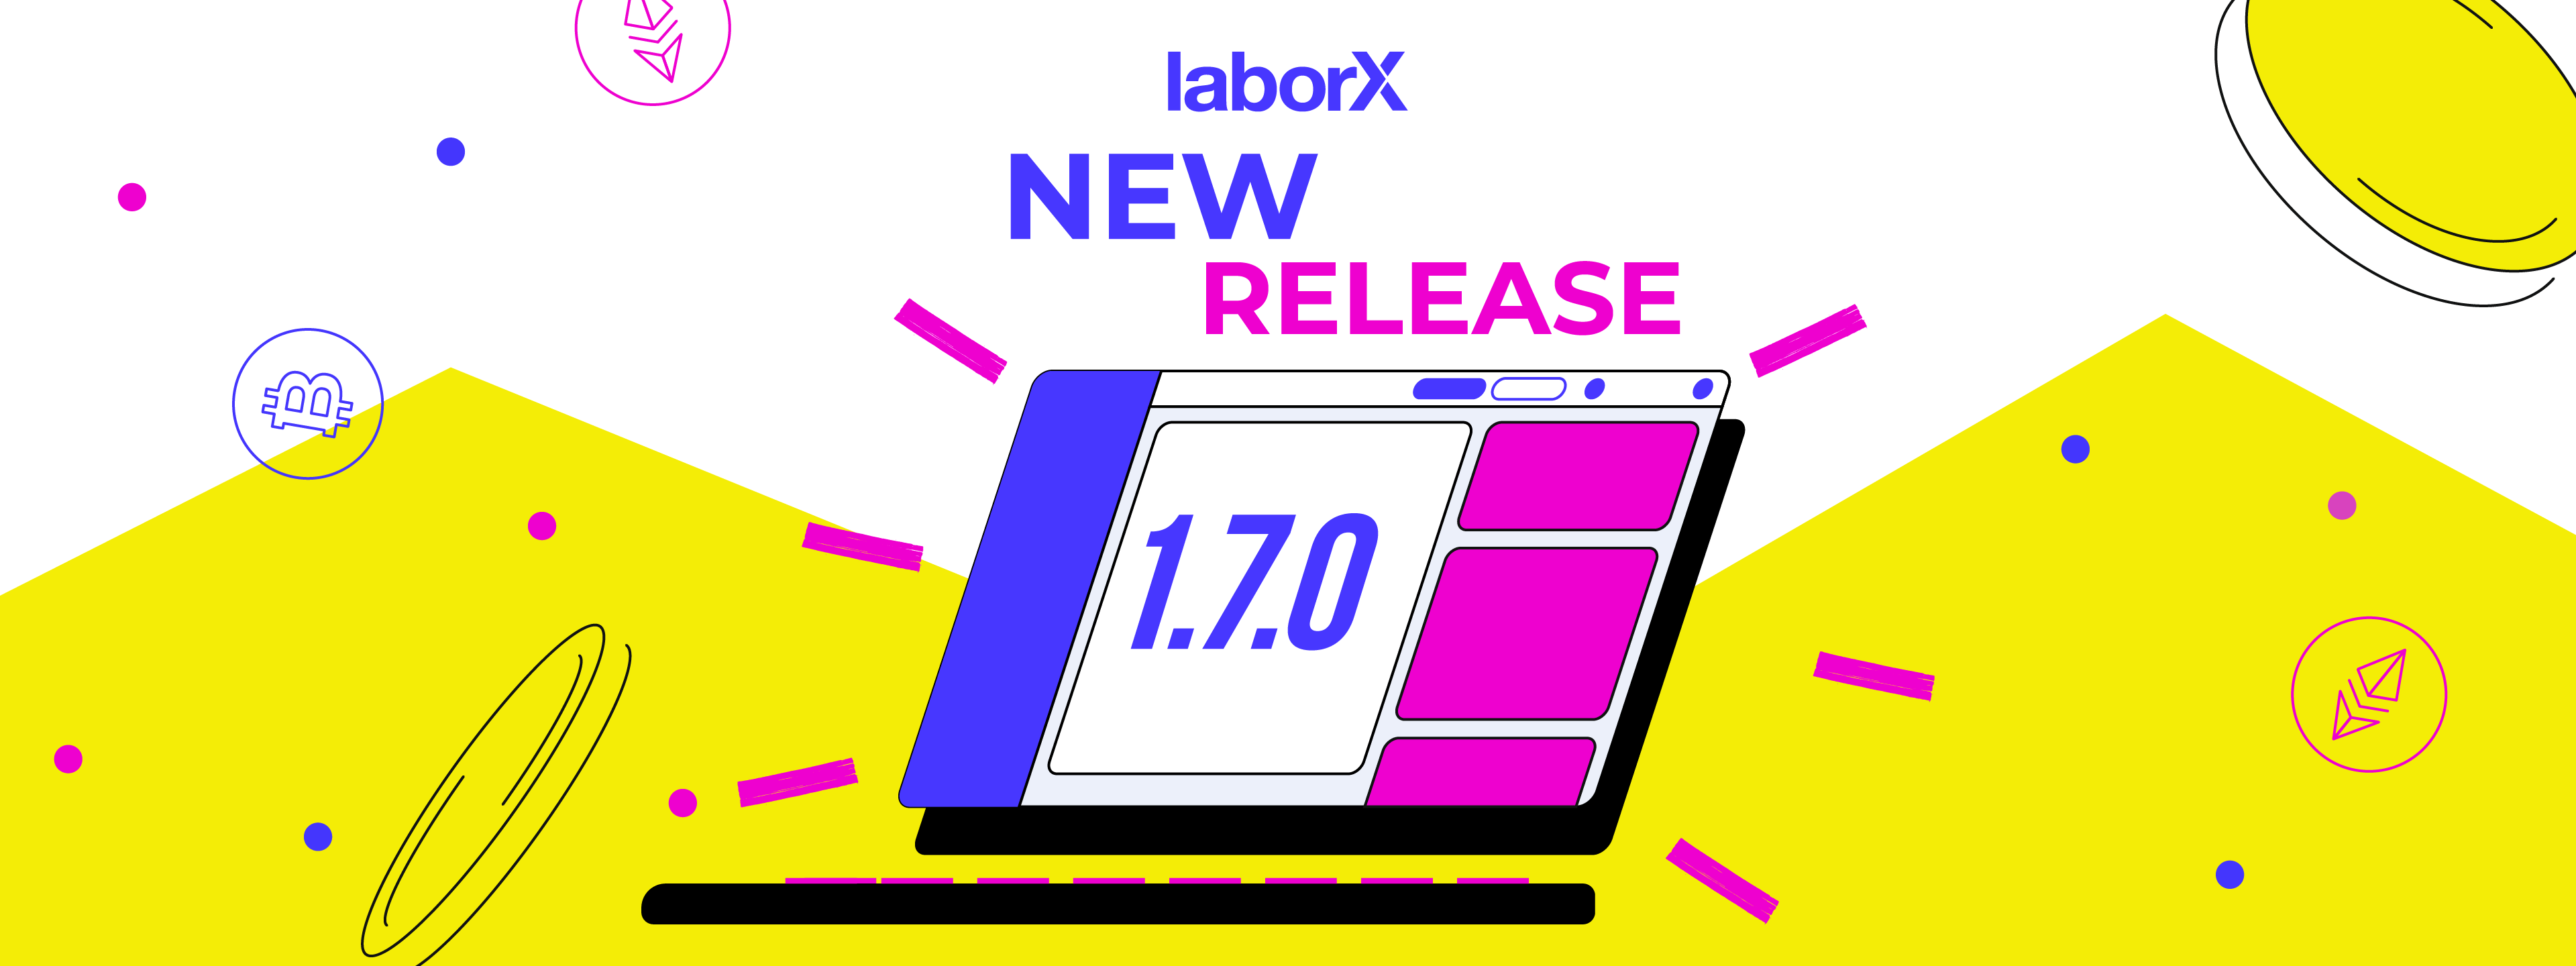 What’s New In LaborX Release 1.7.0?